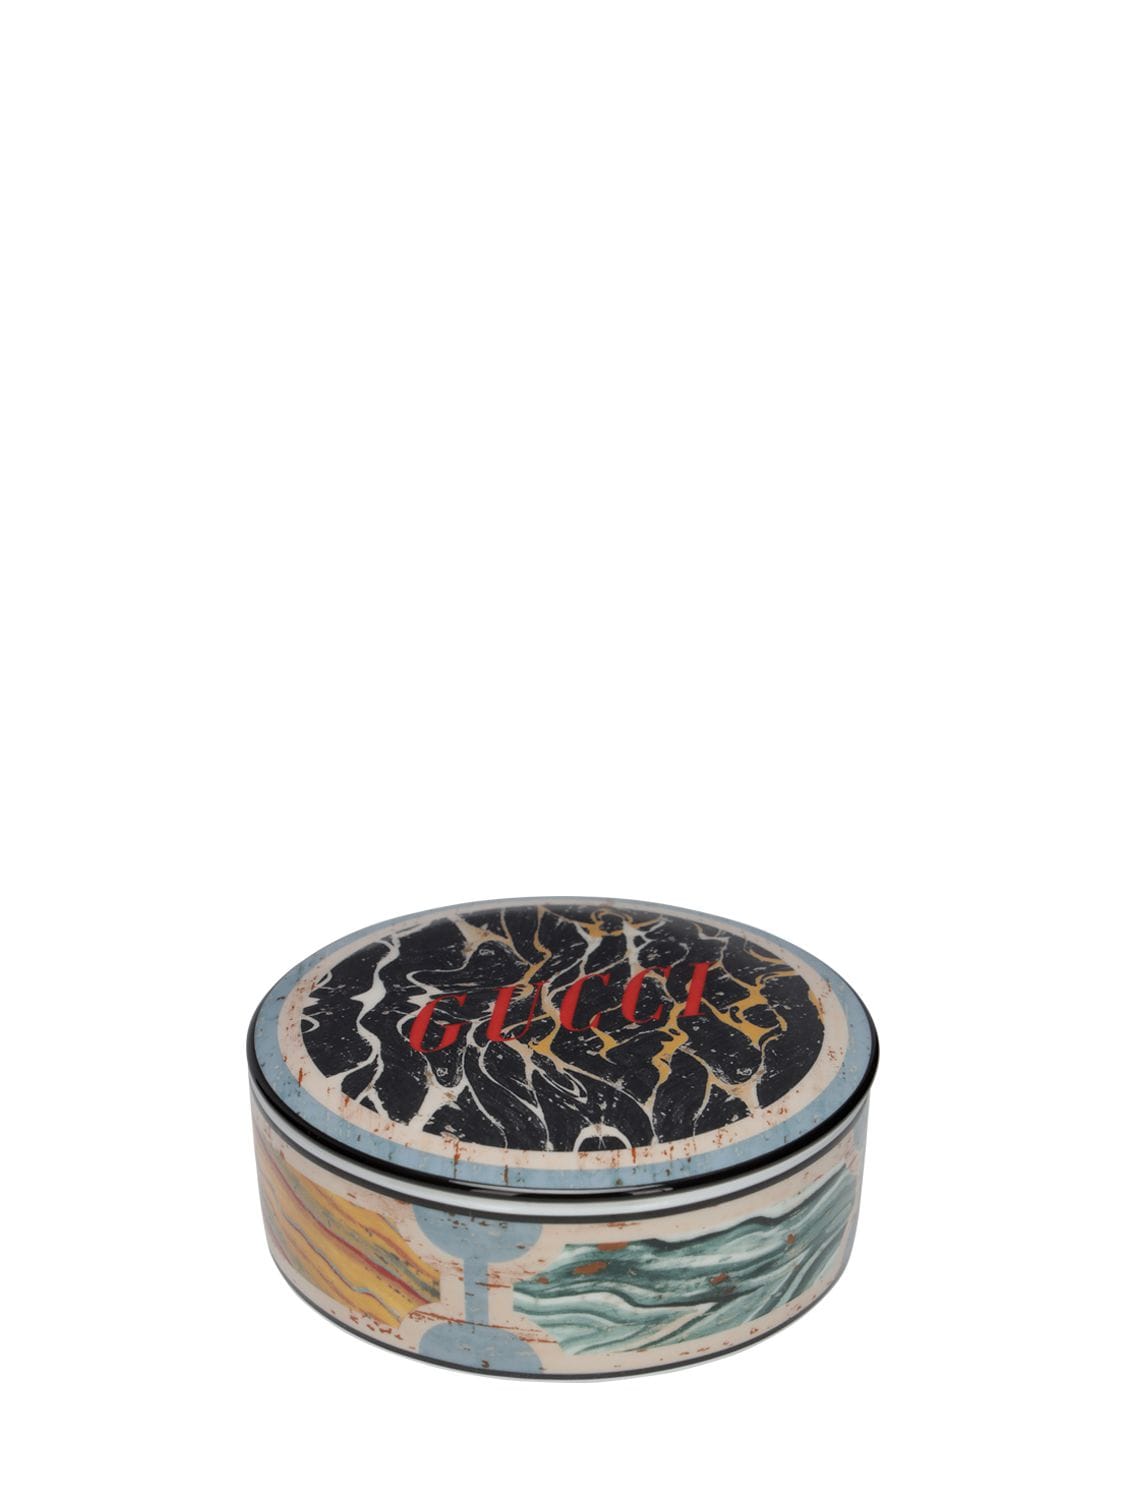 GUCCI HAND-PAINTED MARBLE EFFECT ROUND BOX,72IWNI019-MTG2OA2